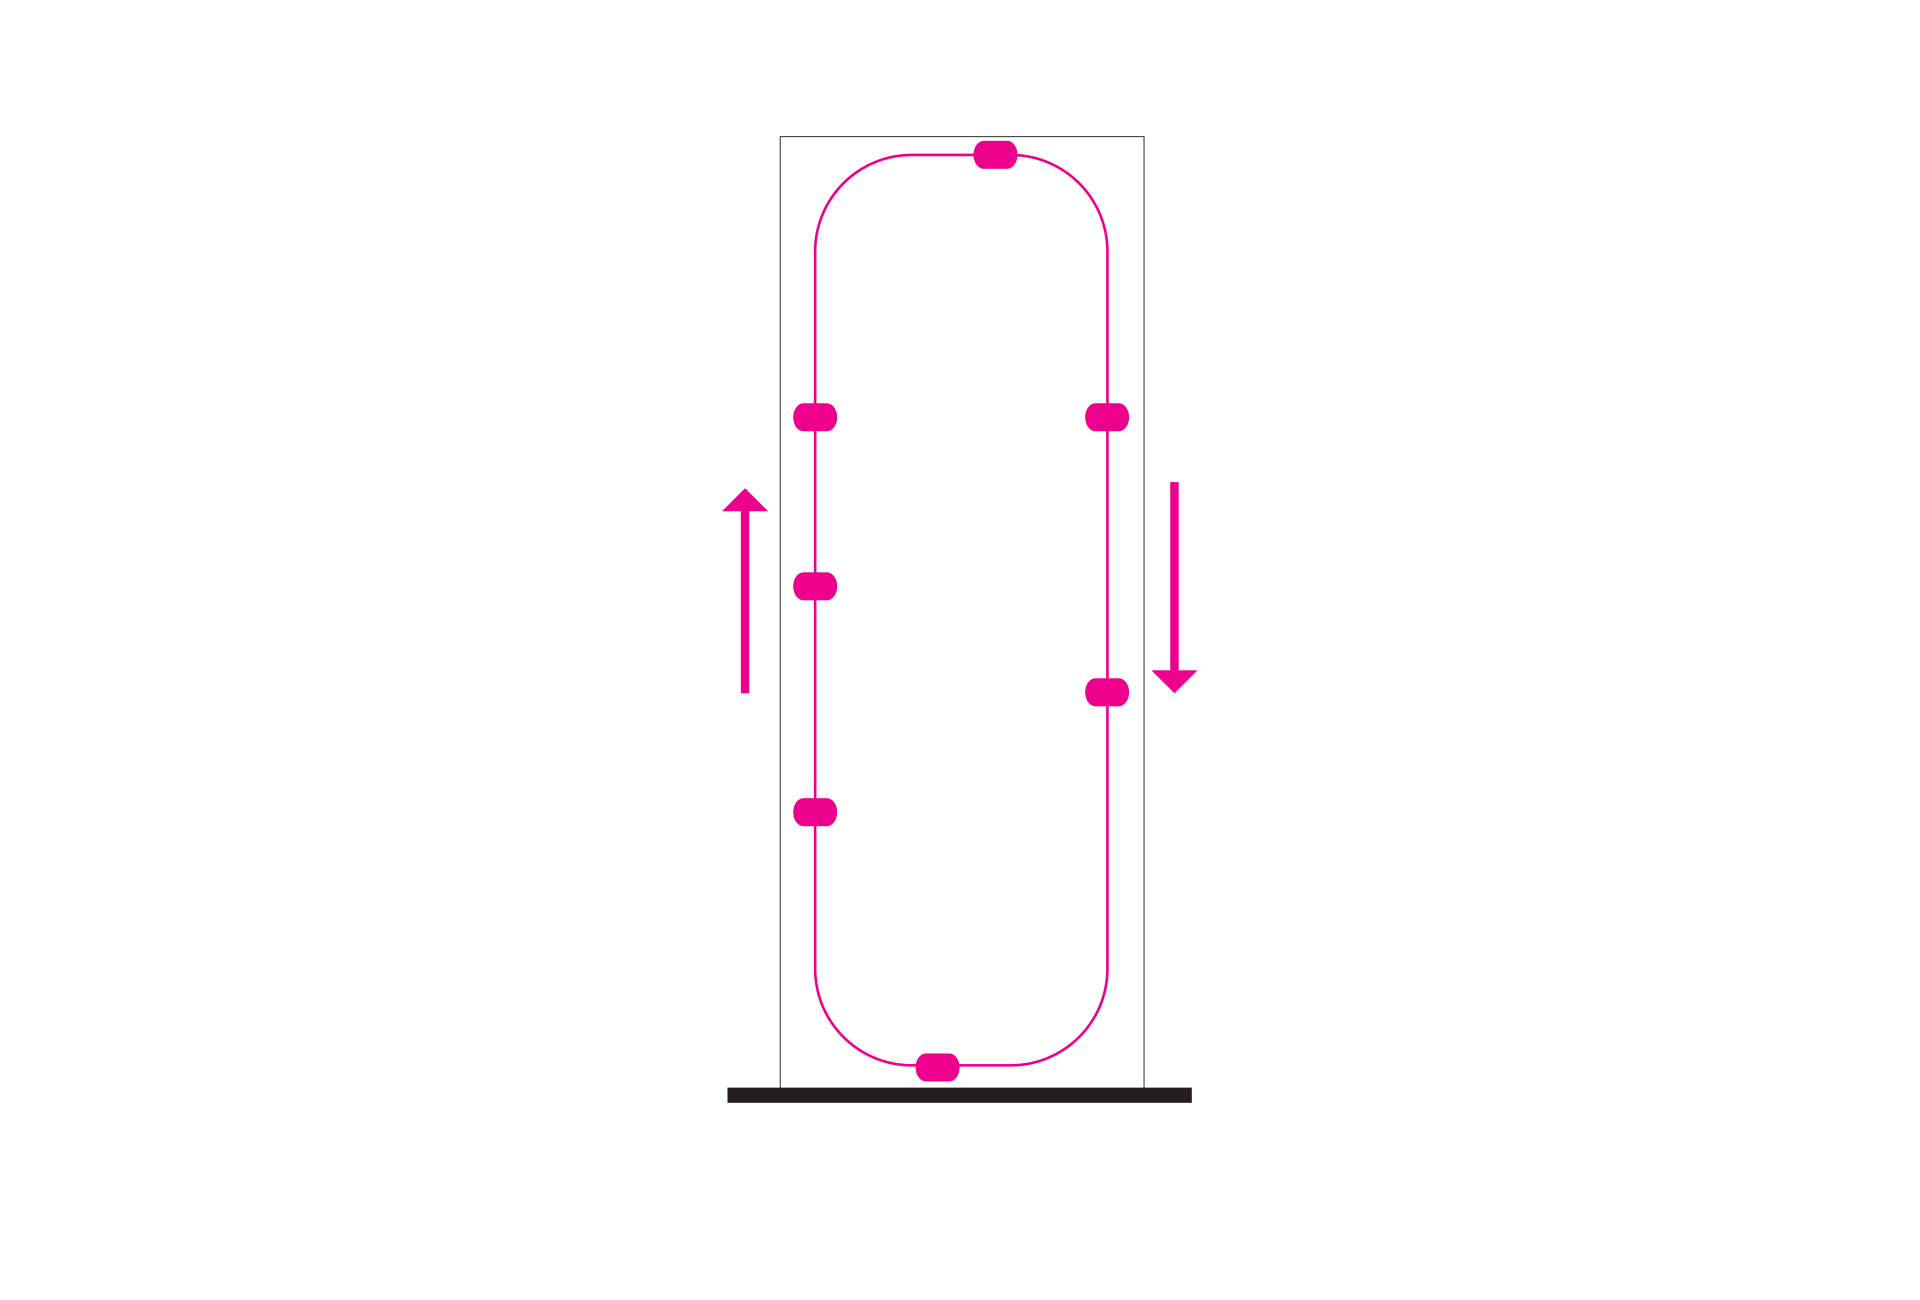 In contrast, all other modern transport systems are one-way looped systems, where multiple vehicles share a single track.